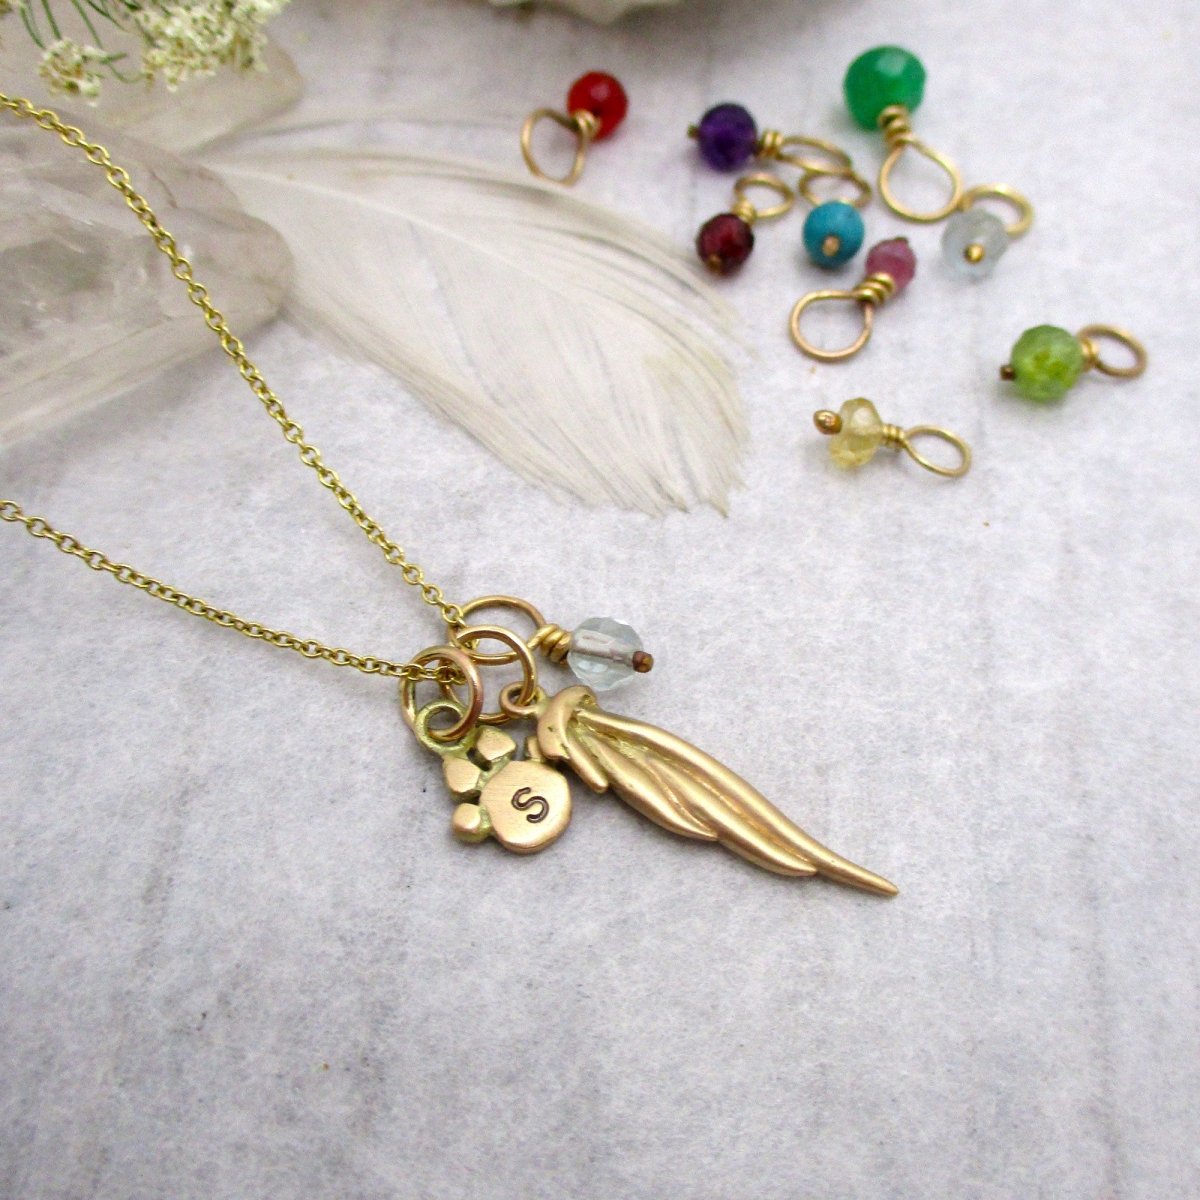 Modern Angel Wing, Personalized Paw and Gem Bead Necklace in Solid 14 Karat Yellow Gold - Luxe Design Jewellery